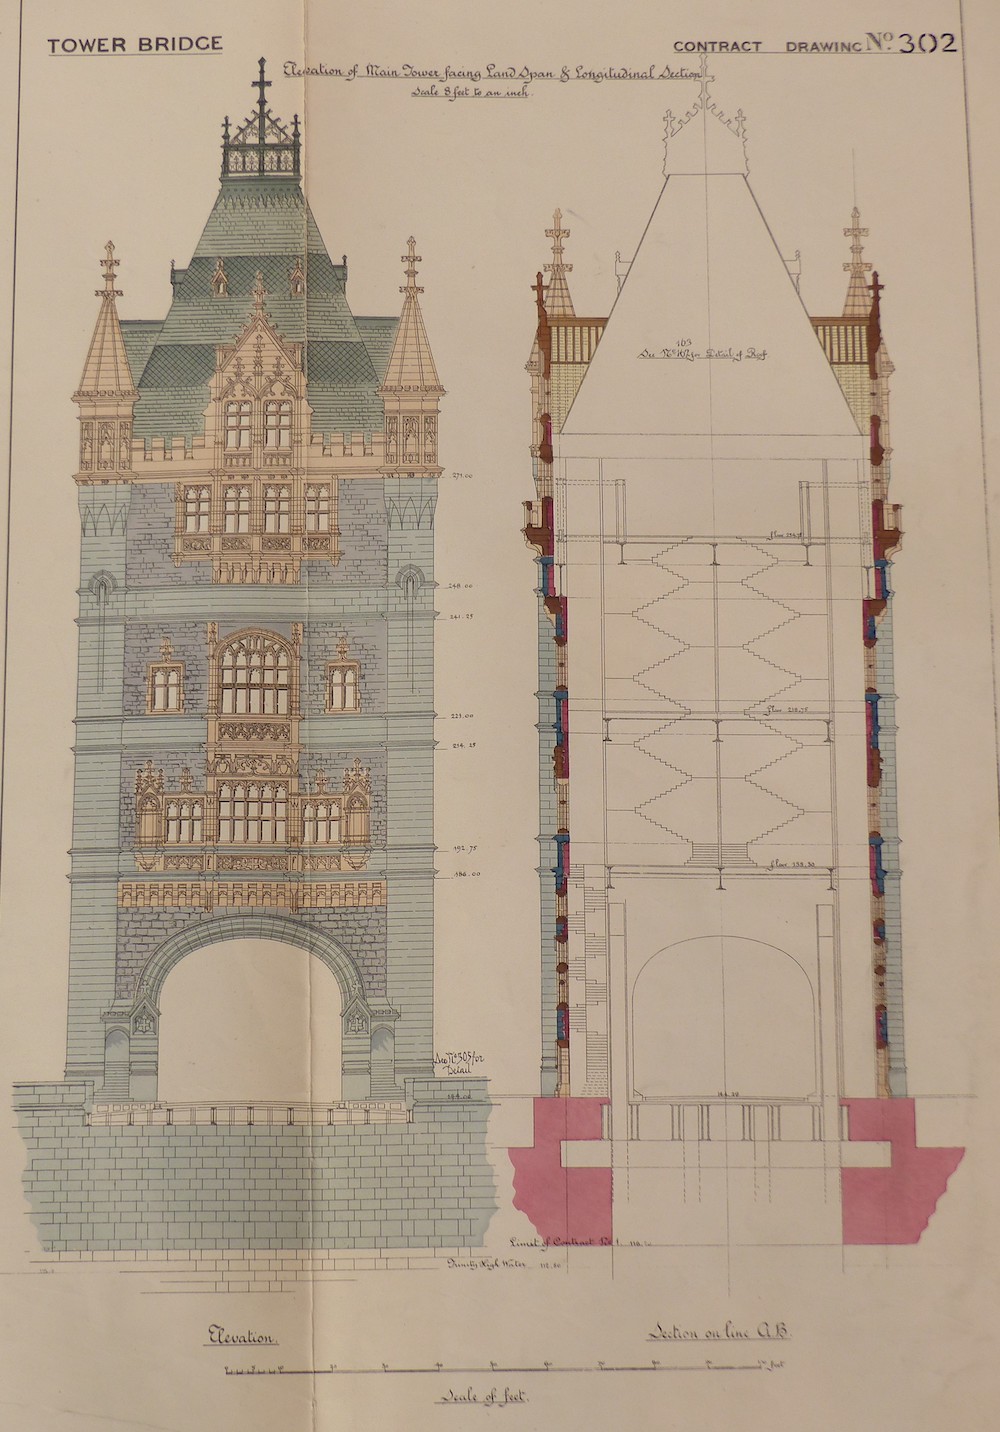 A Collection Of Plans Relating To The Design Of Tower Brdige London Sold Ś5,500